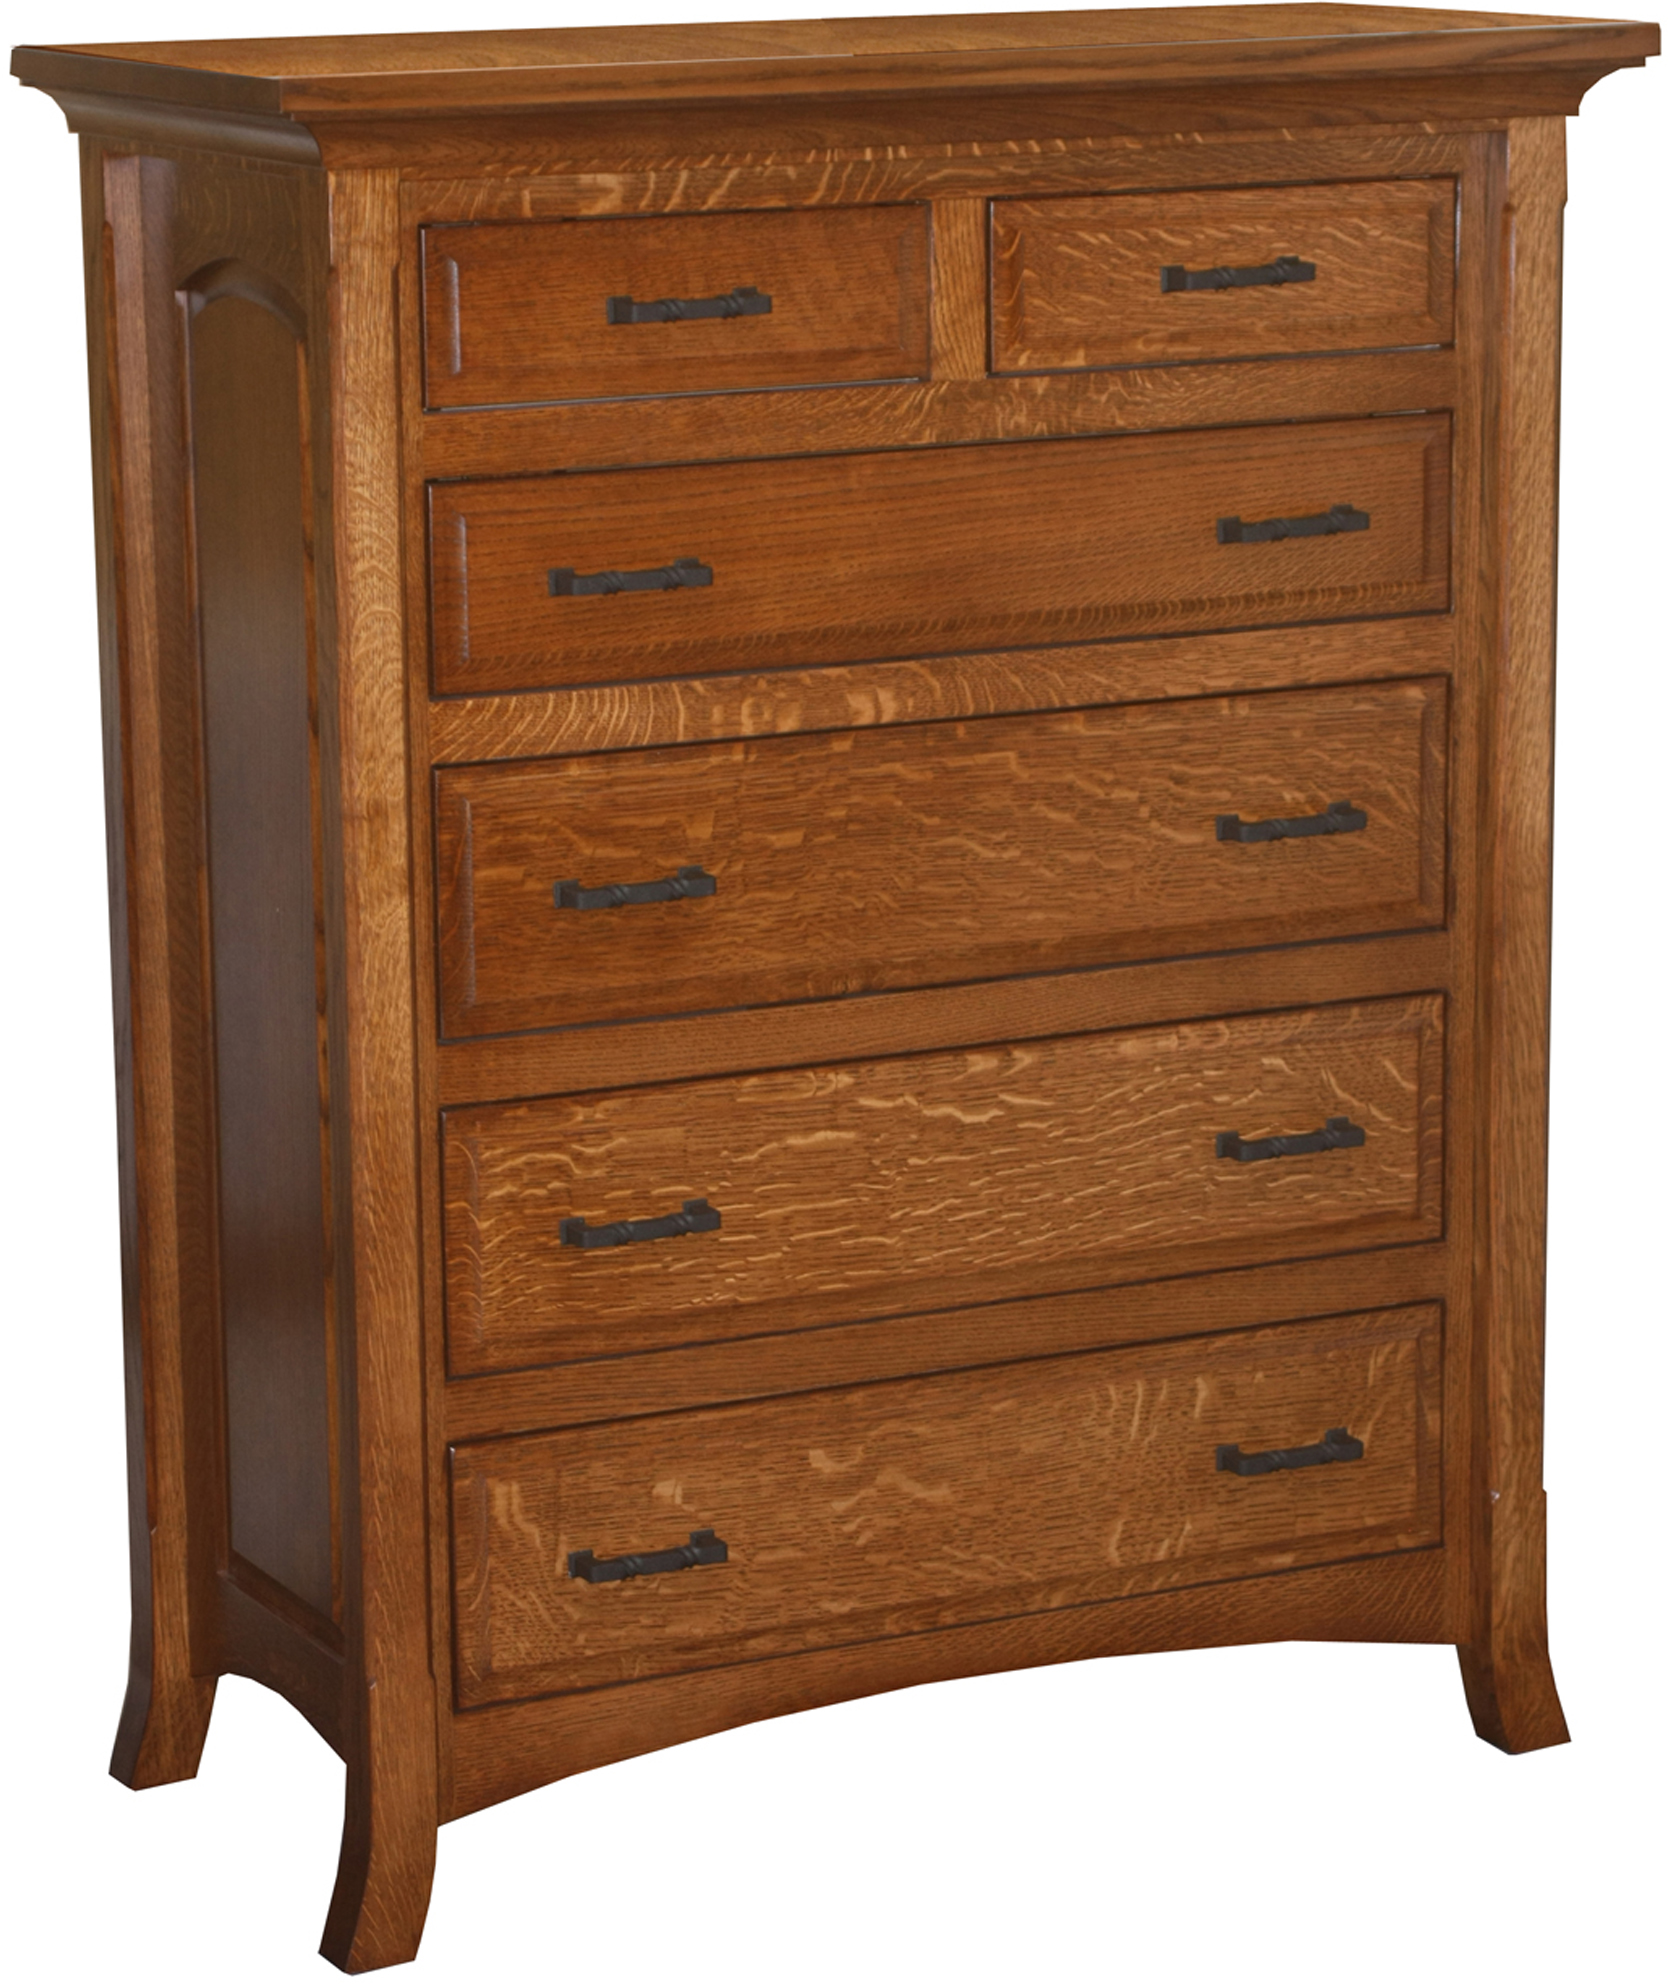 Homestead SixDrawer Chest Amish Chest of Drawers